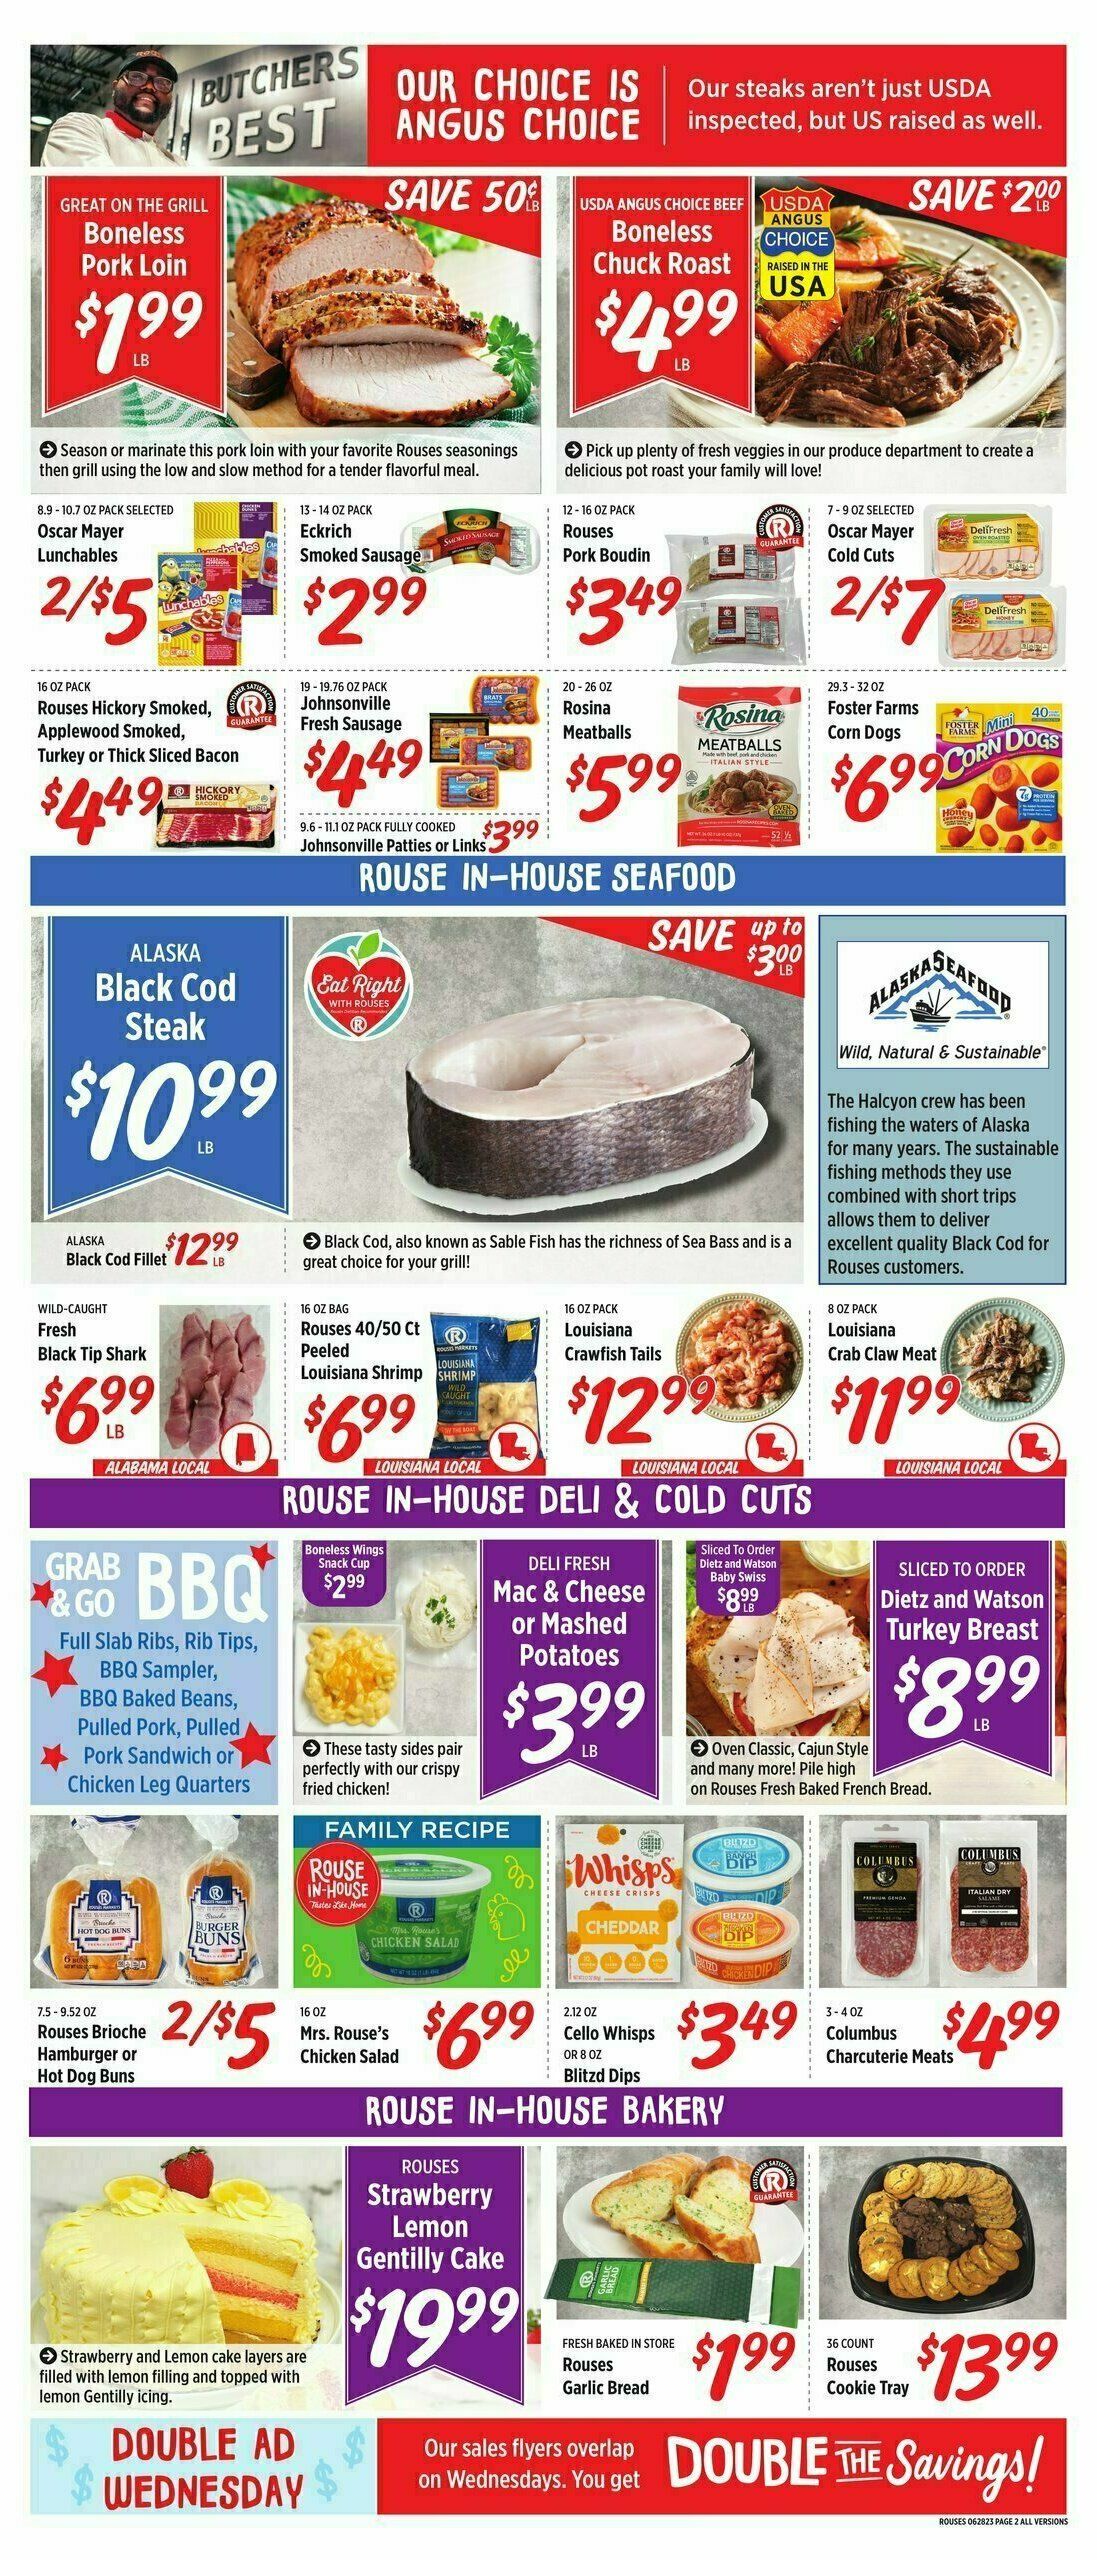 Rouses Markets Weekly Ad from June 28